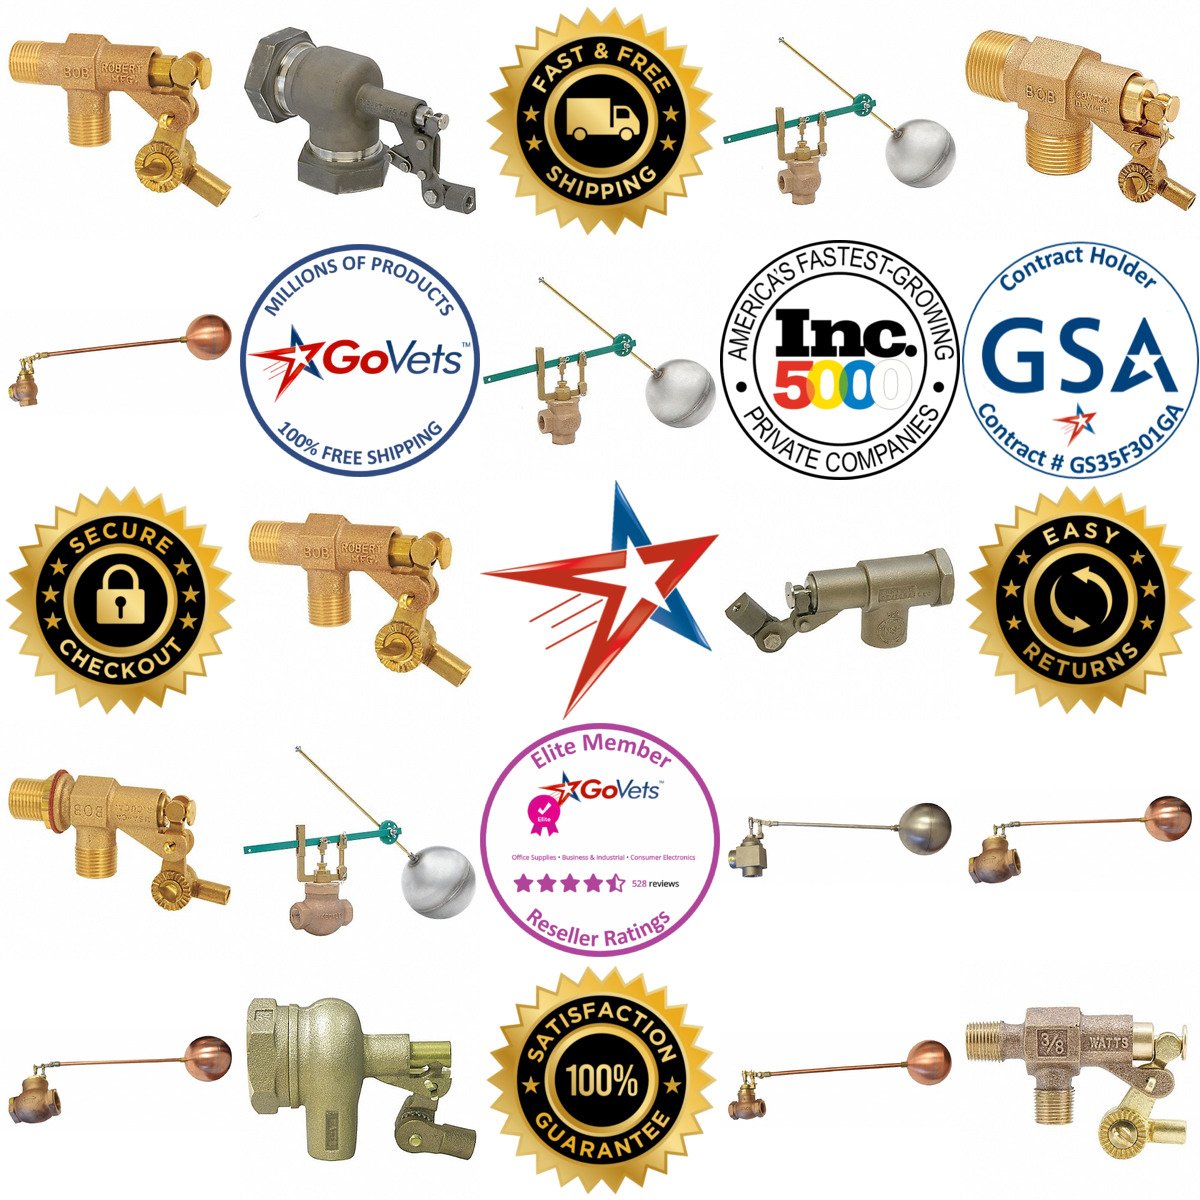 A selection of Float Valves products on GoVets